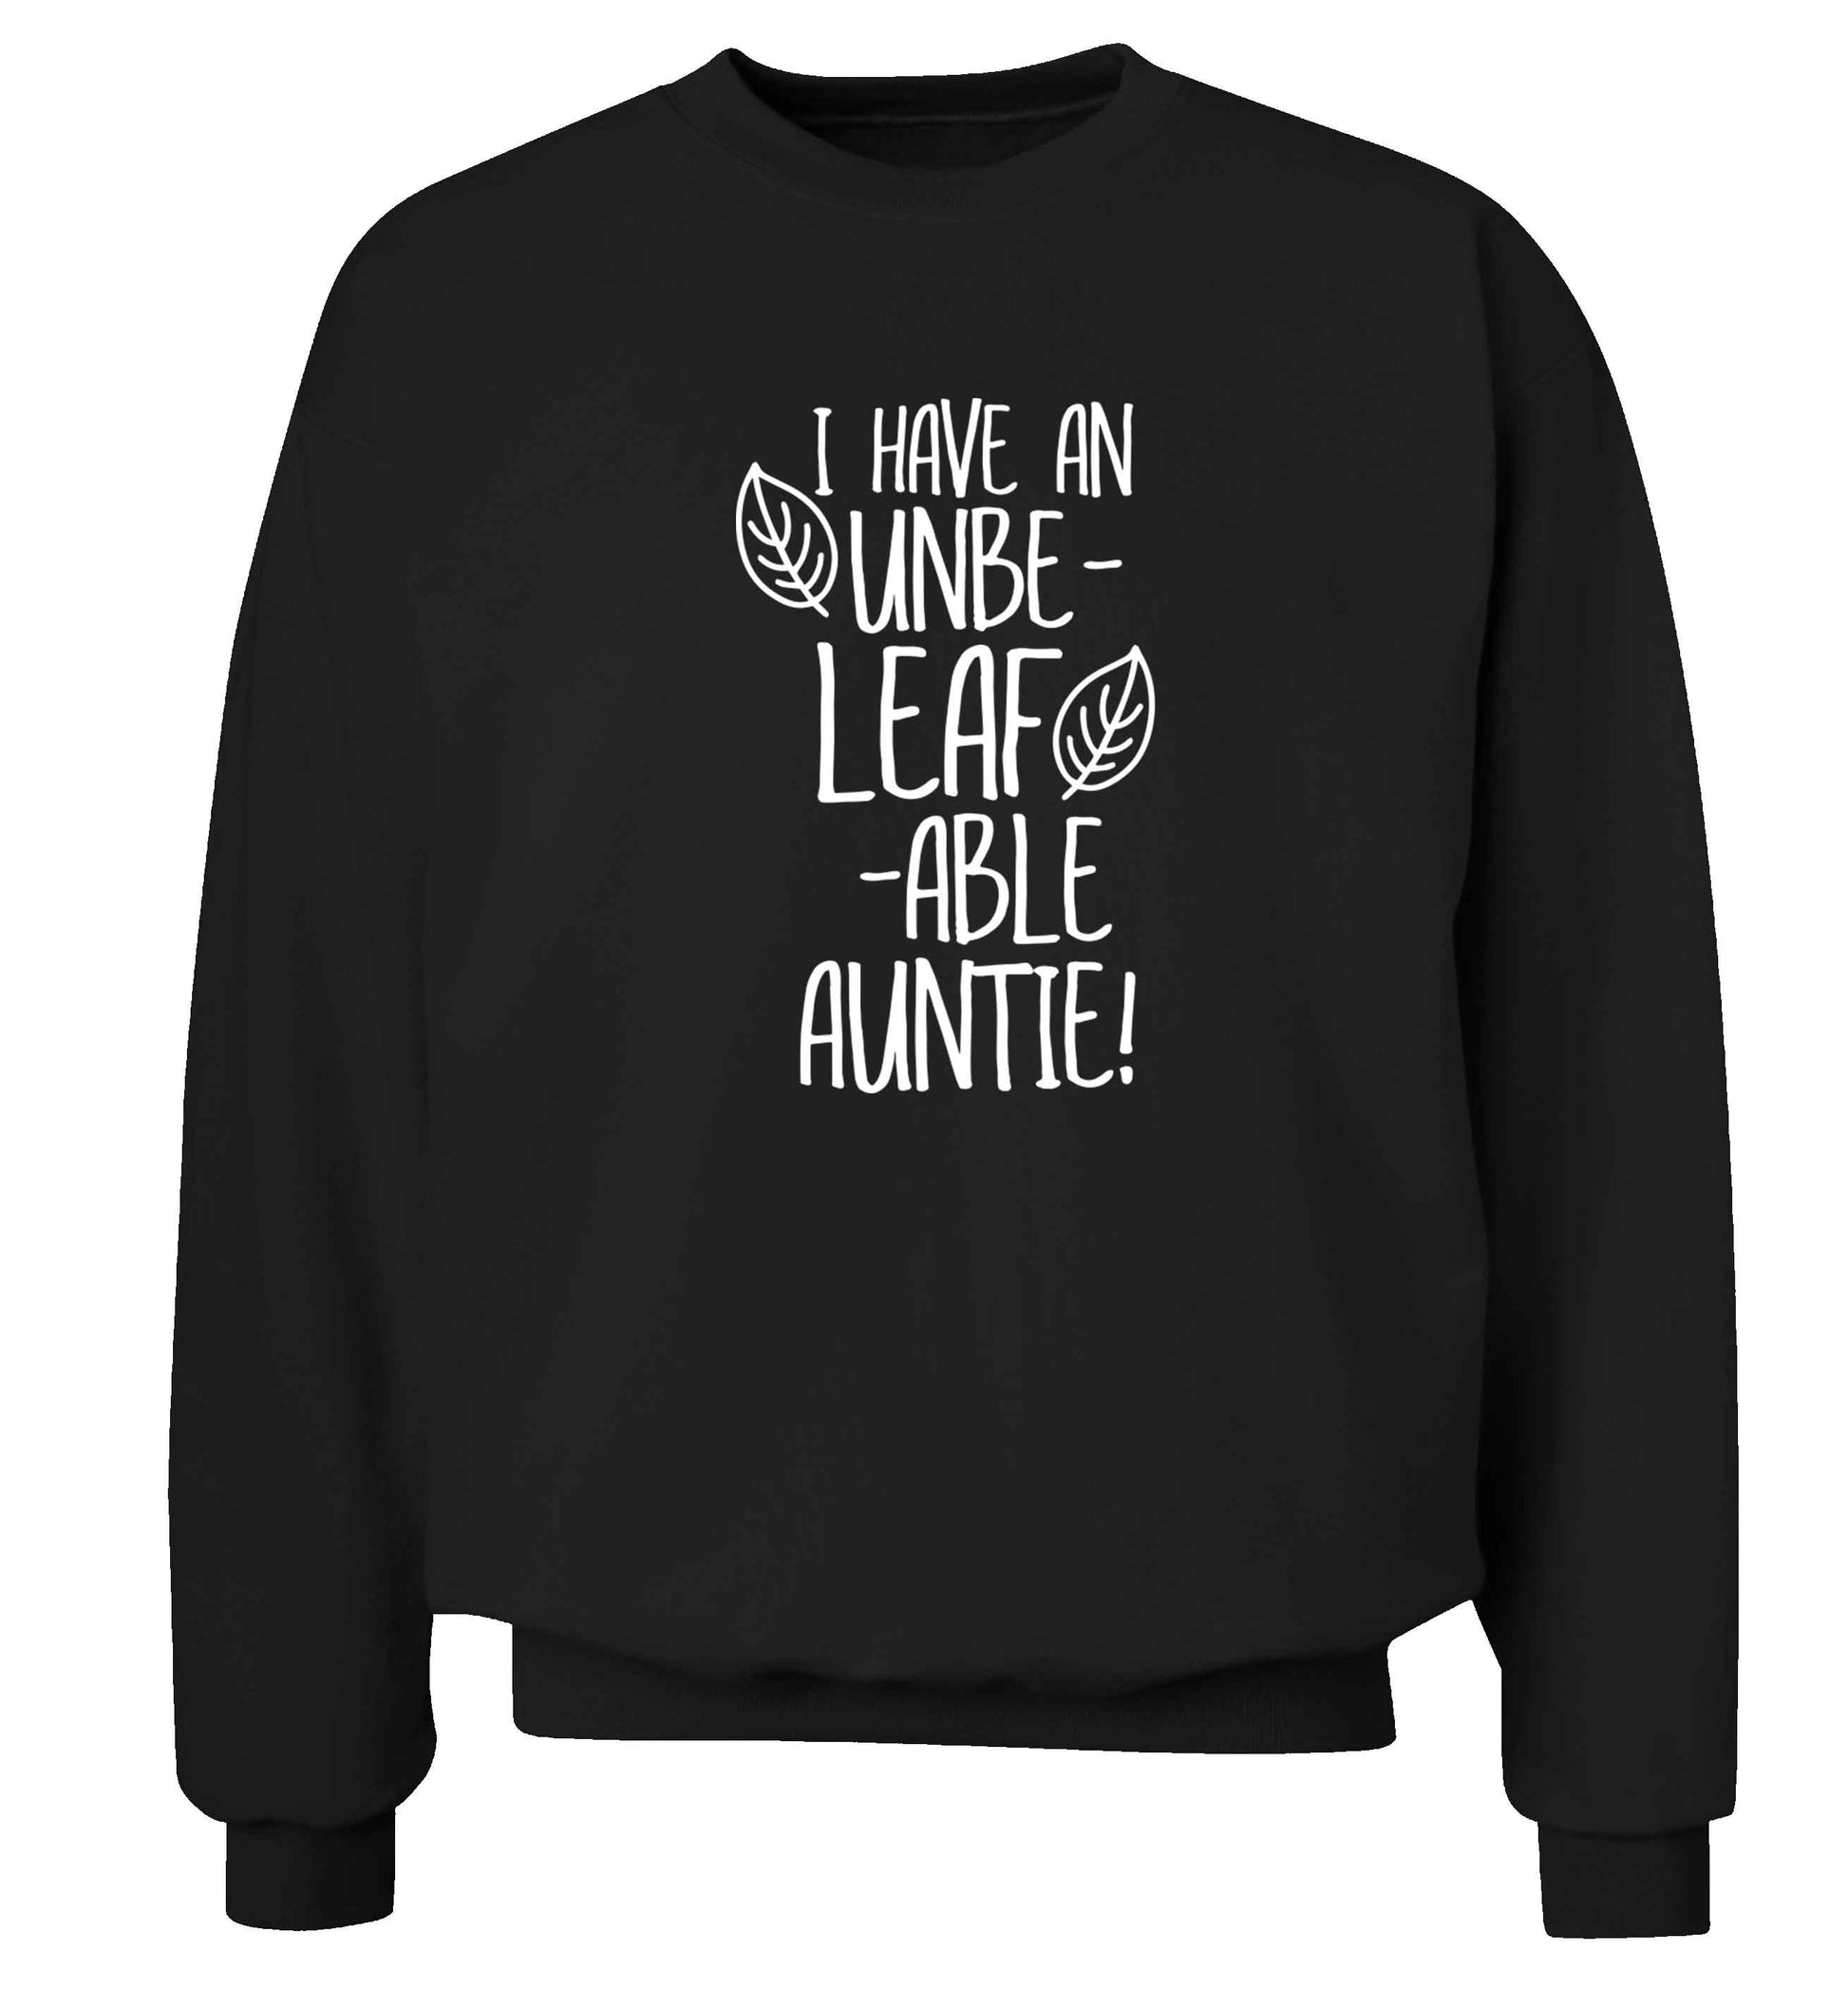 I have an unbe-leaf-able auntie Adult's unisex black Sweater 2XL